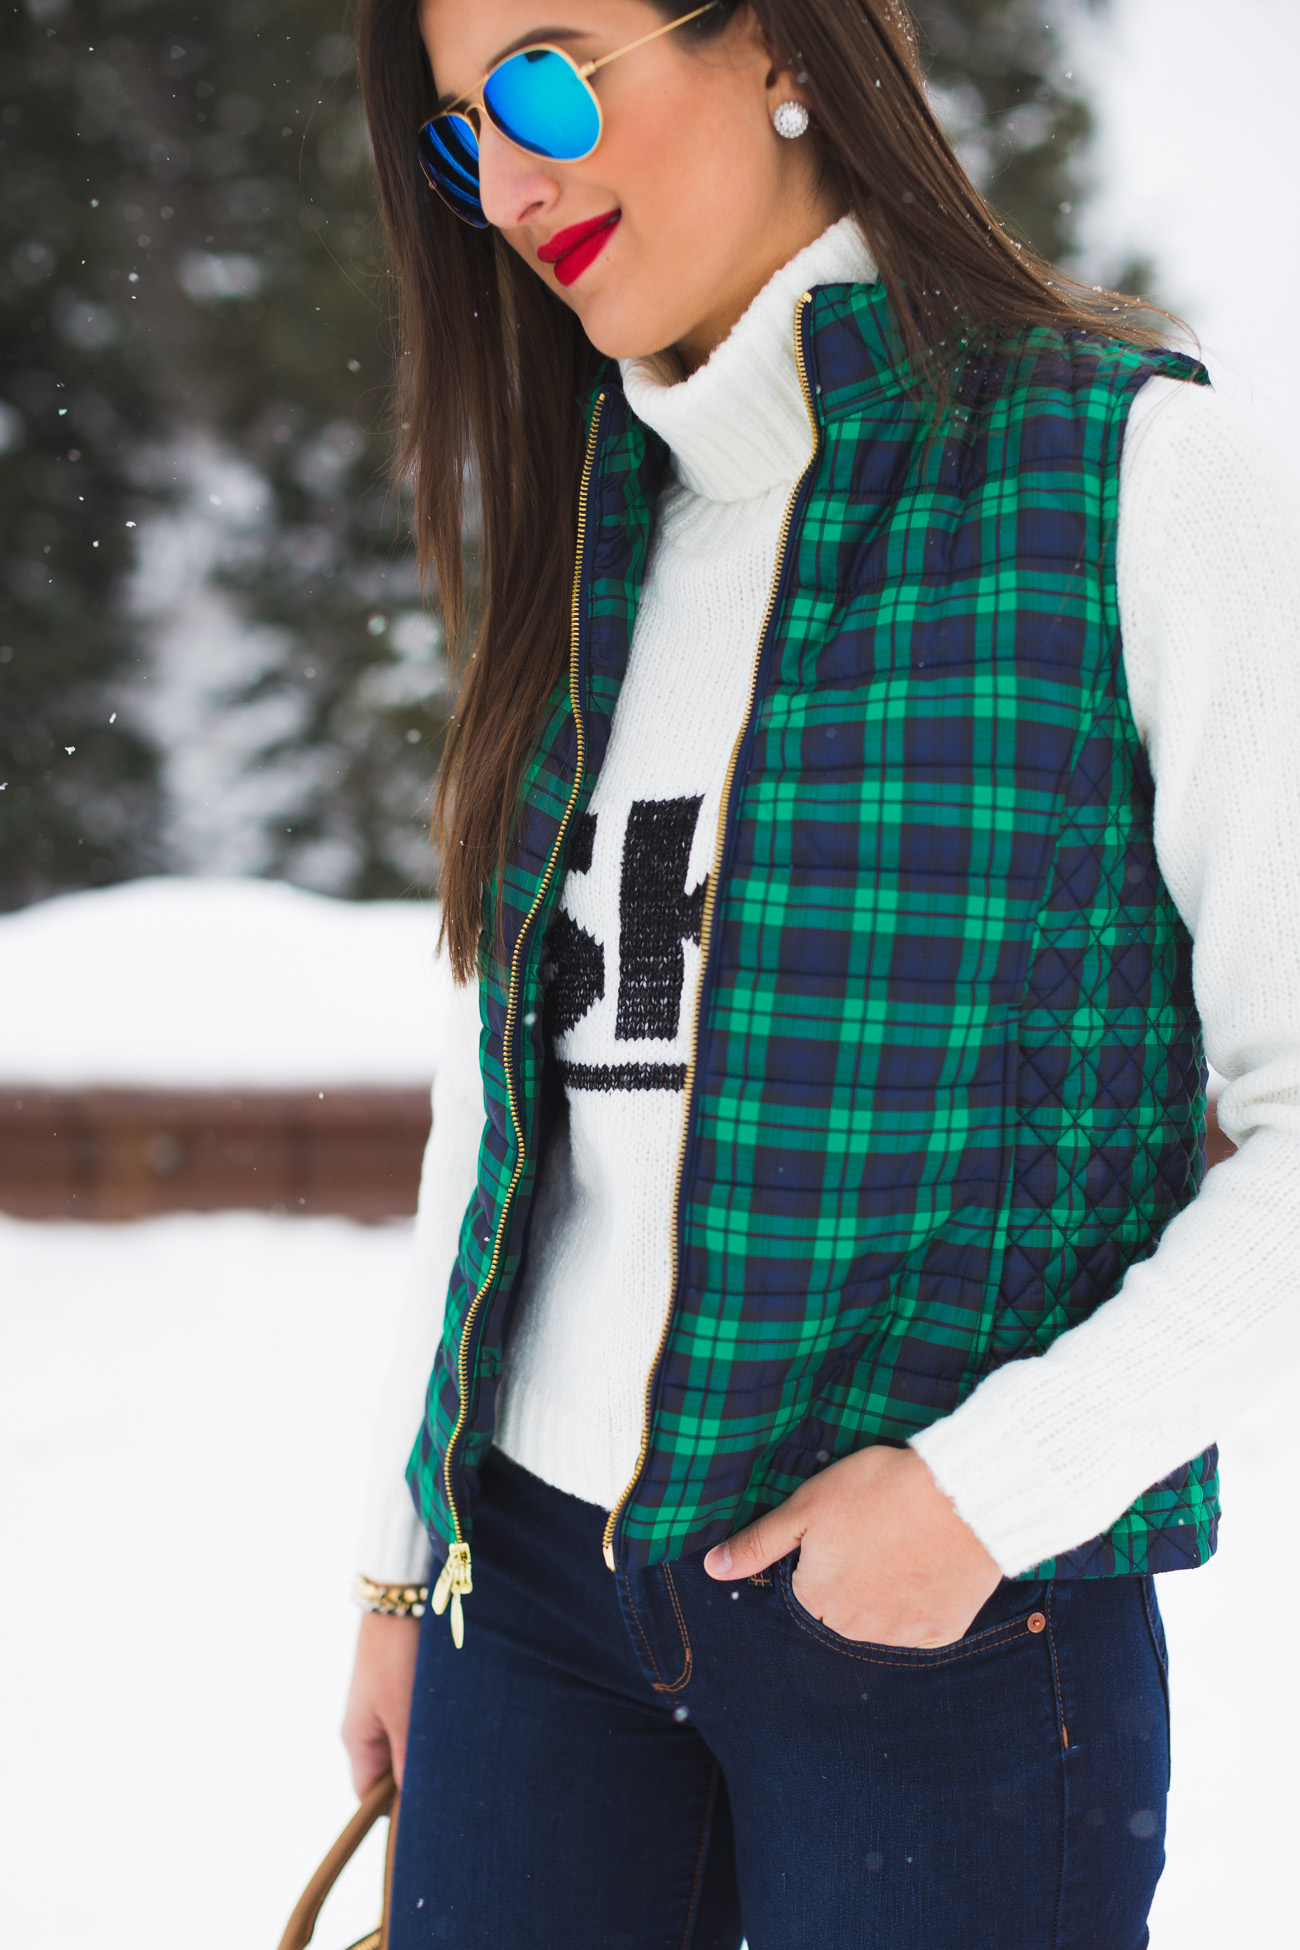 ski turtleneck, winter style, winter fashion, plaid vest, plaid quilted vest, plaid puffer vest, brown booties, colorado, crested butte, ski town, ski sweater, tory burch robinson pebbled square tote, ray ban flash lens, vineyard vines plaid vest // grace wainwright from a southern drawl